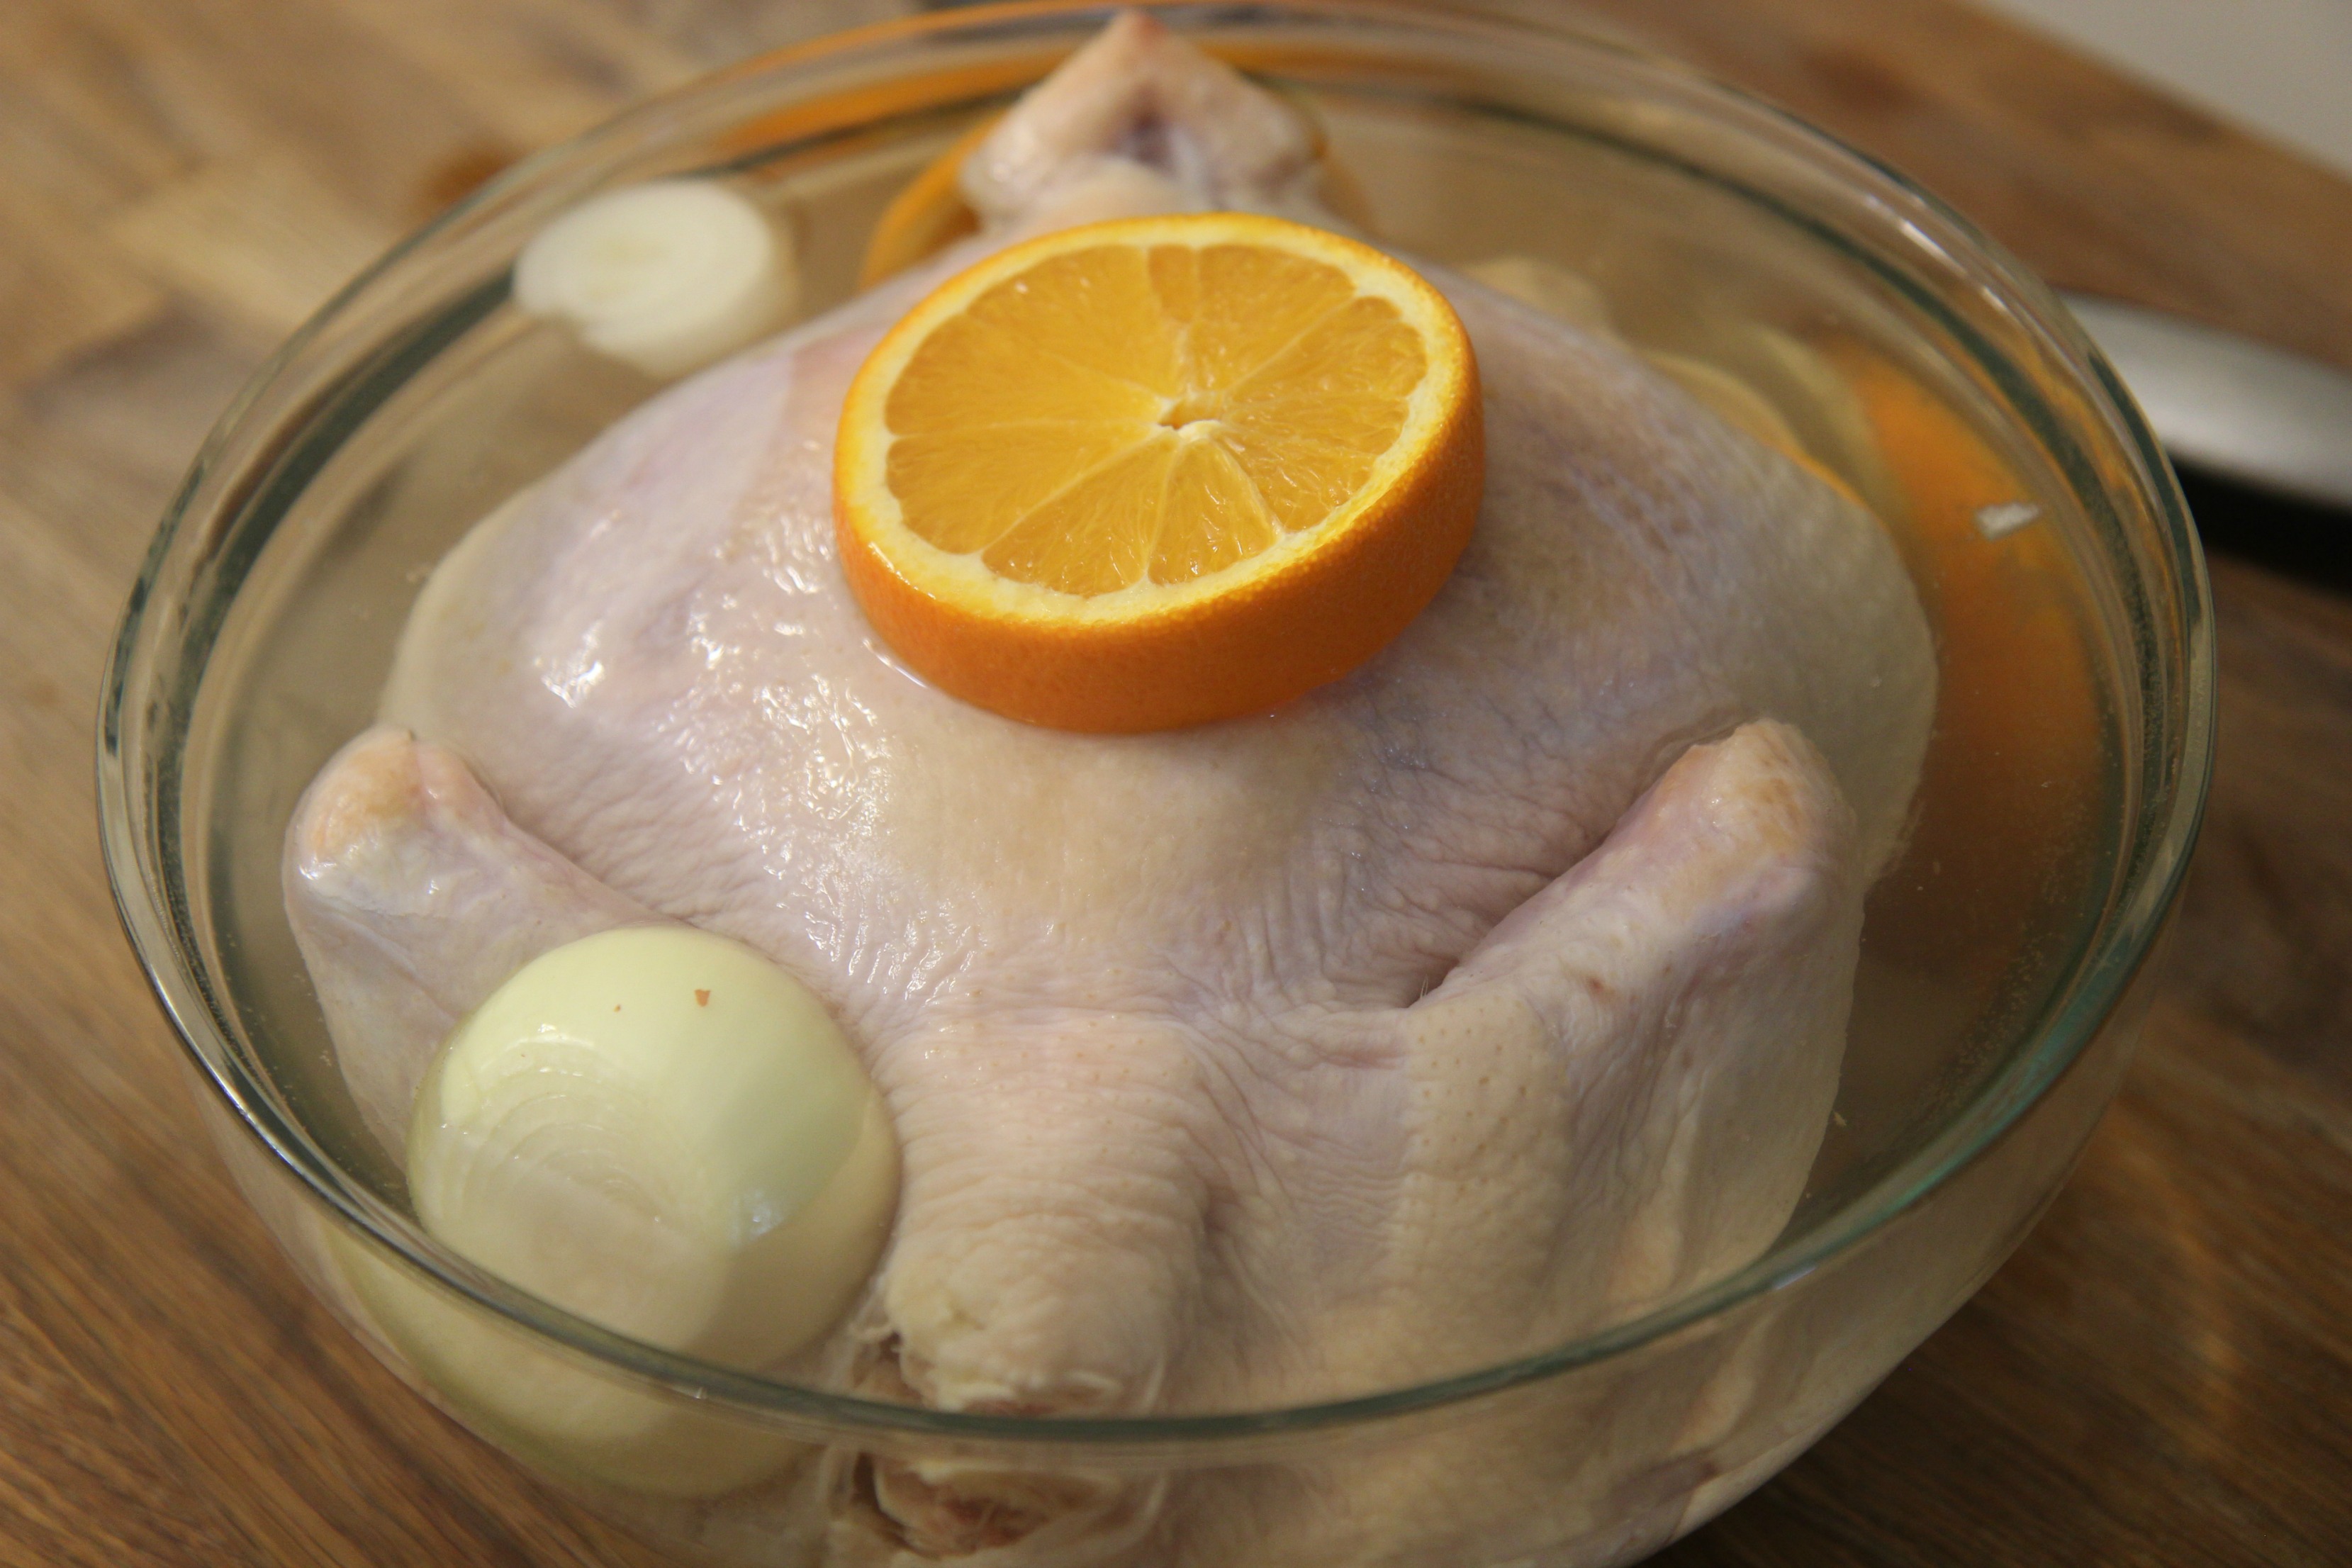 Brine the chicken in a mixture of water, salt and sugar with garlic, onions and oranges